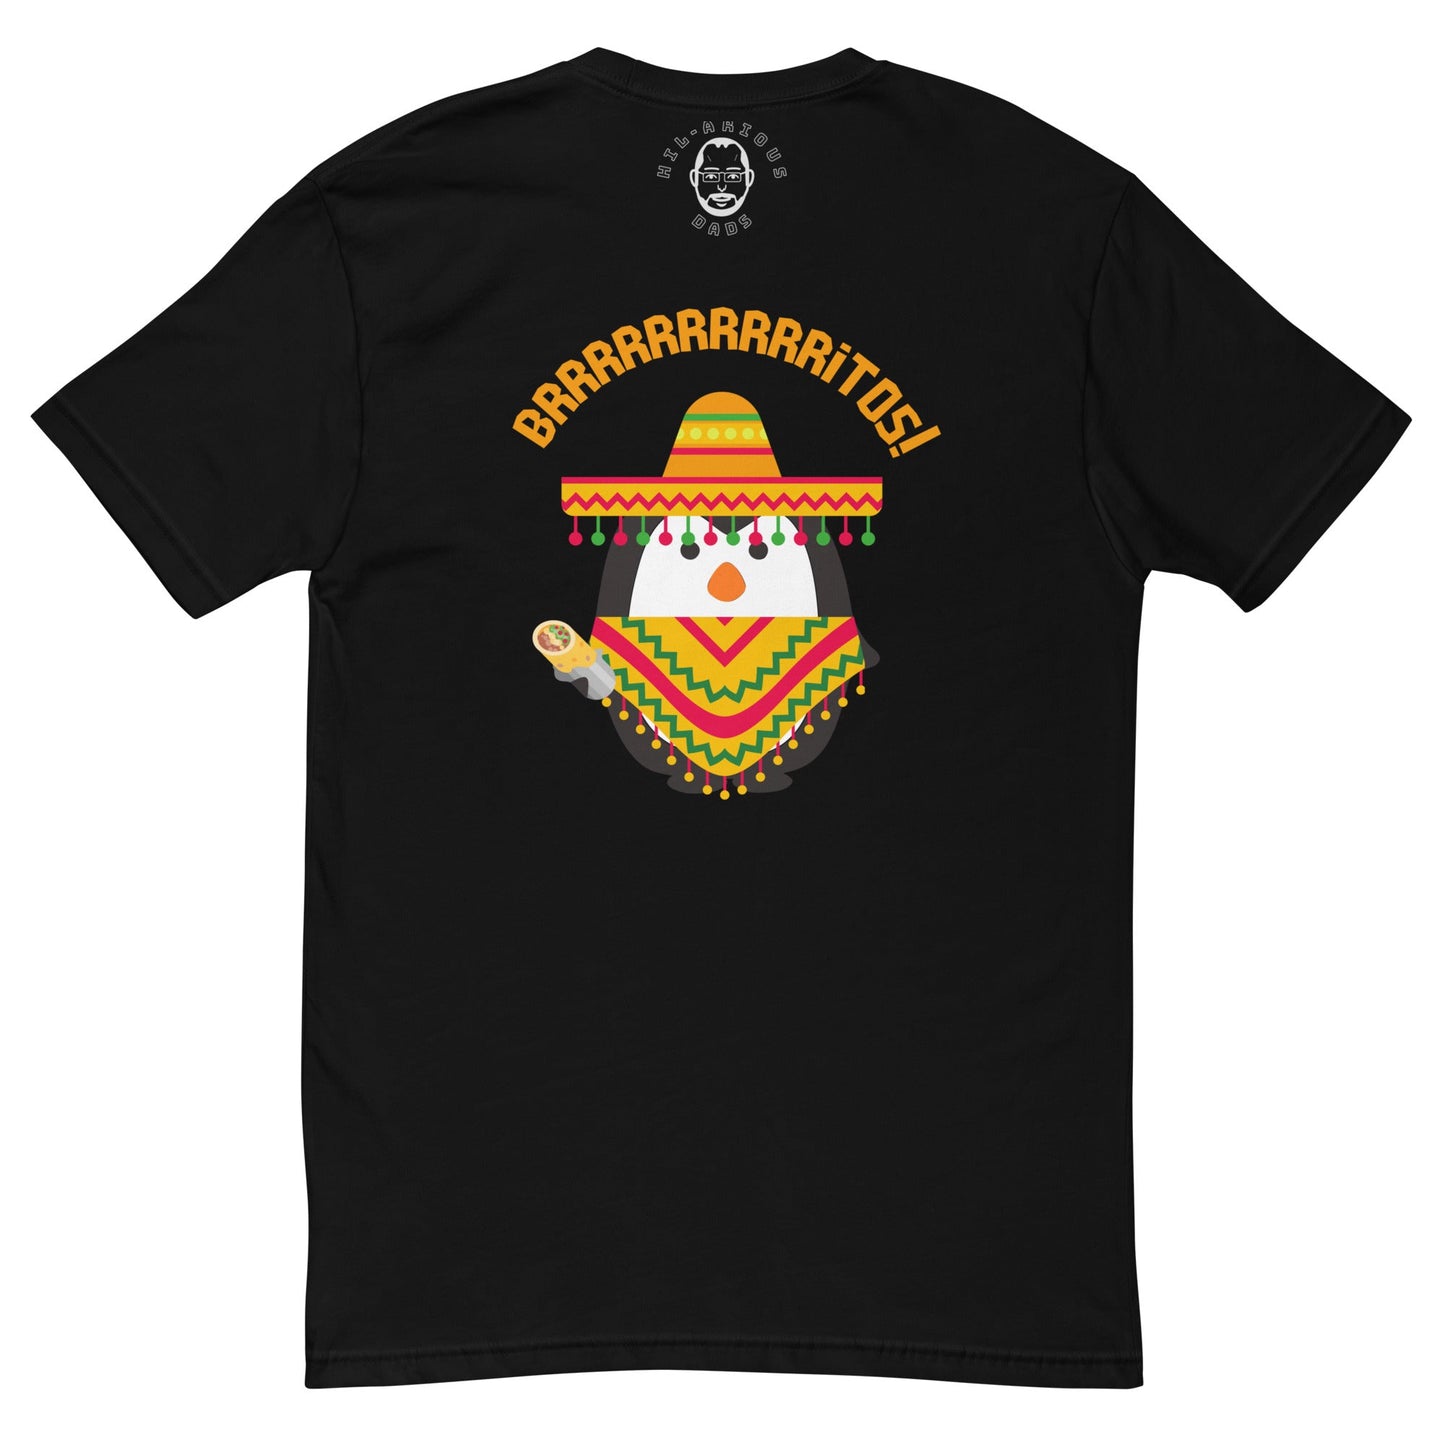 What do penguins like to eat during Cinco De Mayo?-T-shirt - Hil-arious Dads